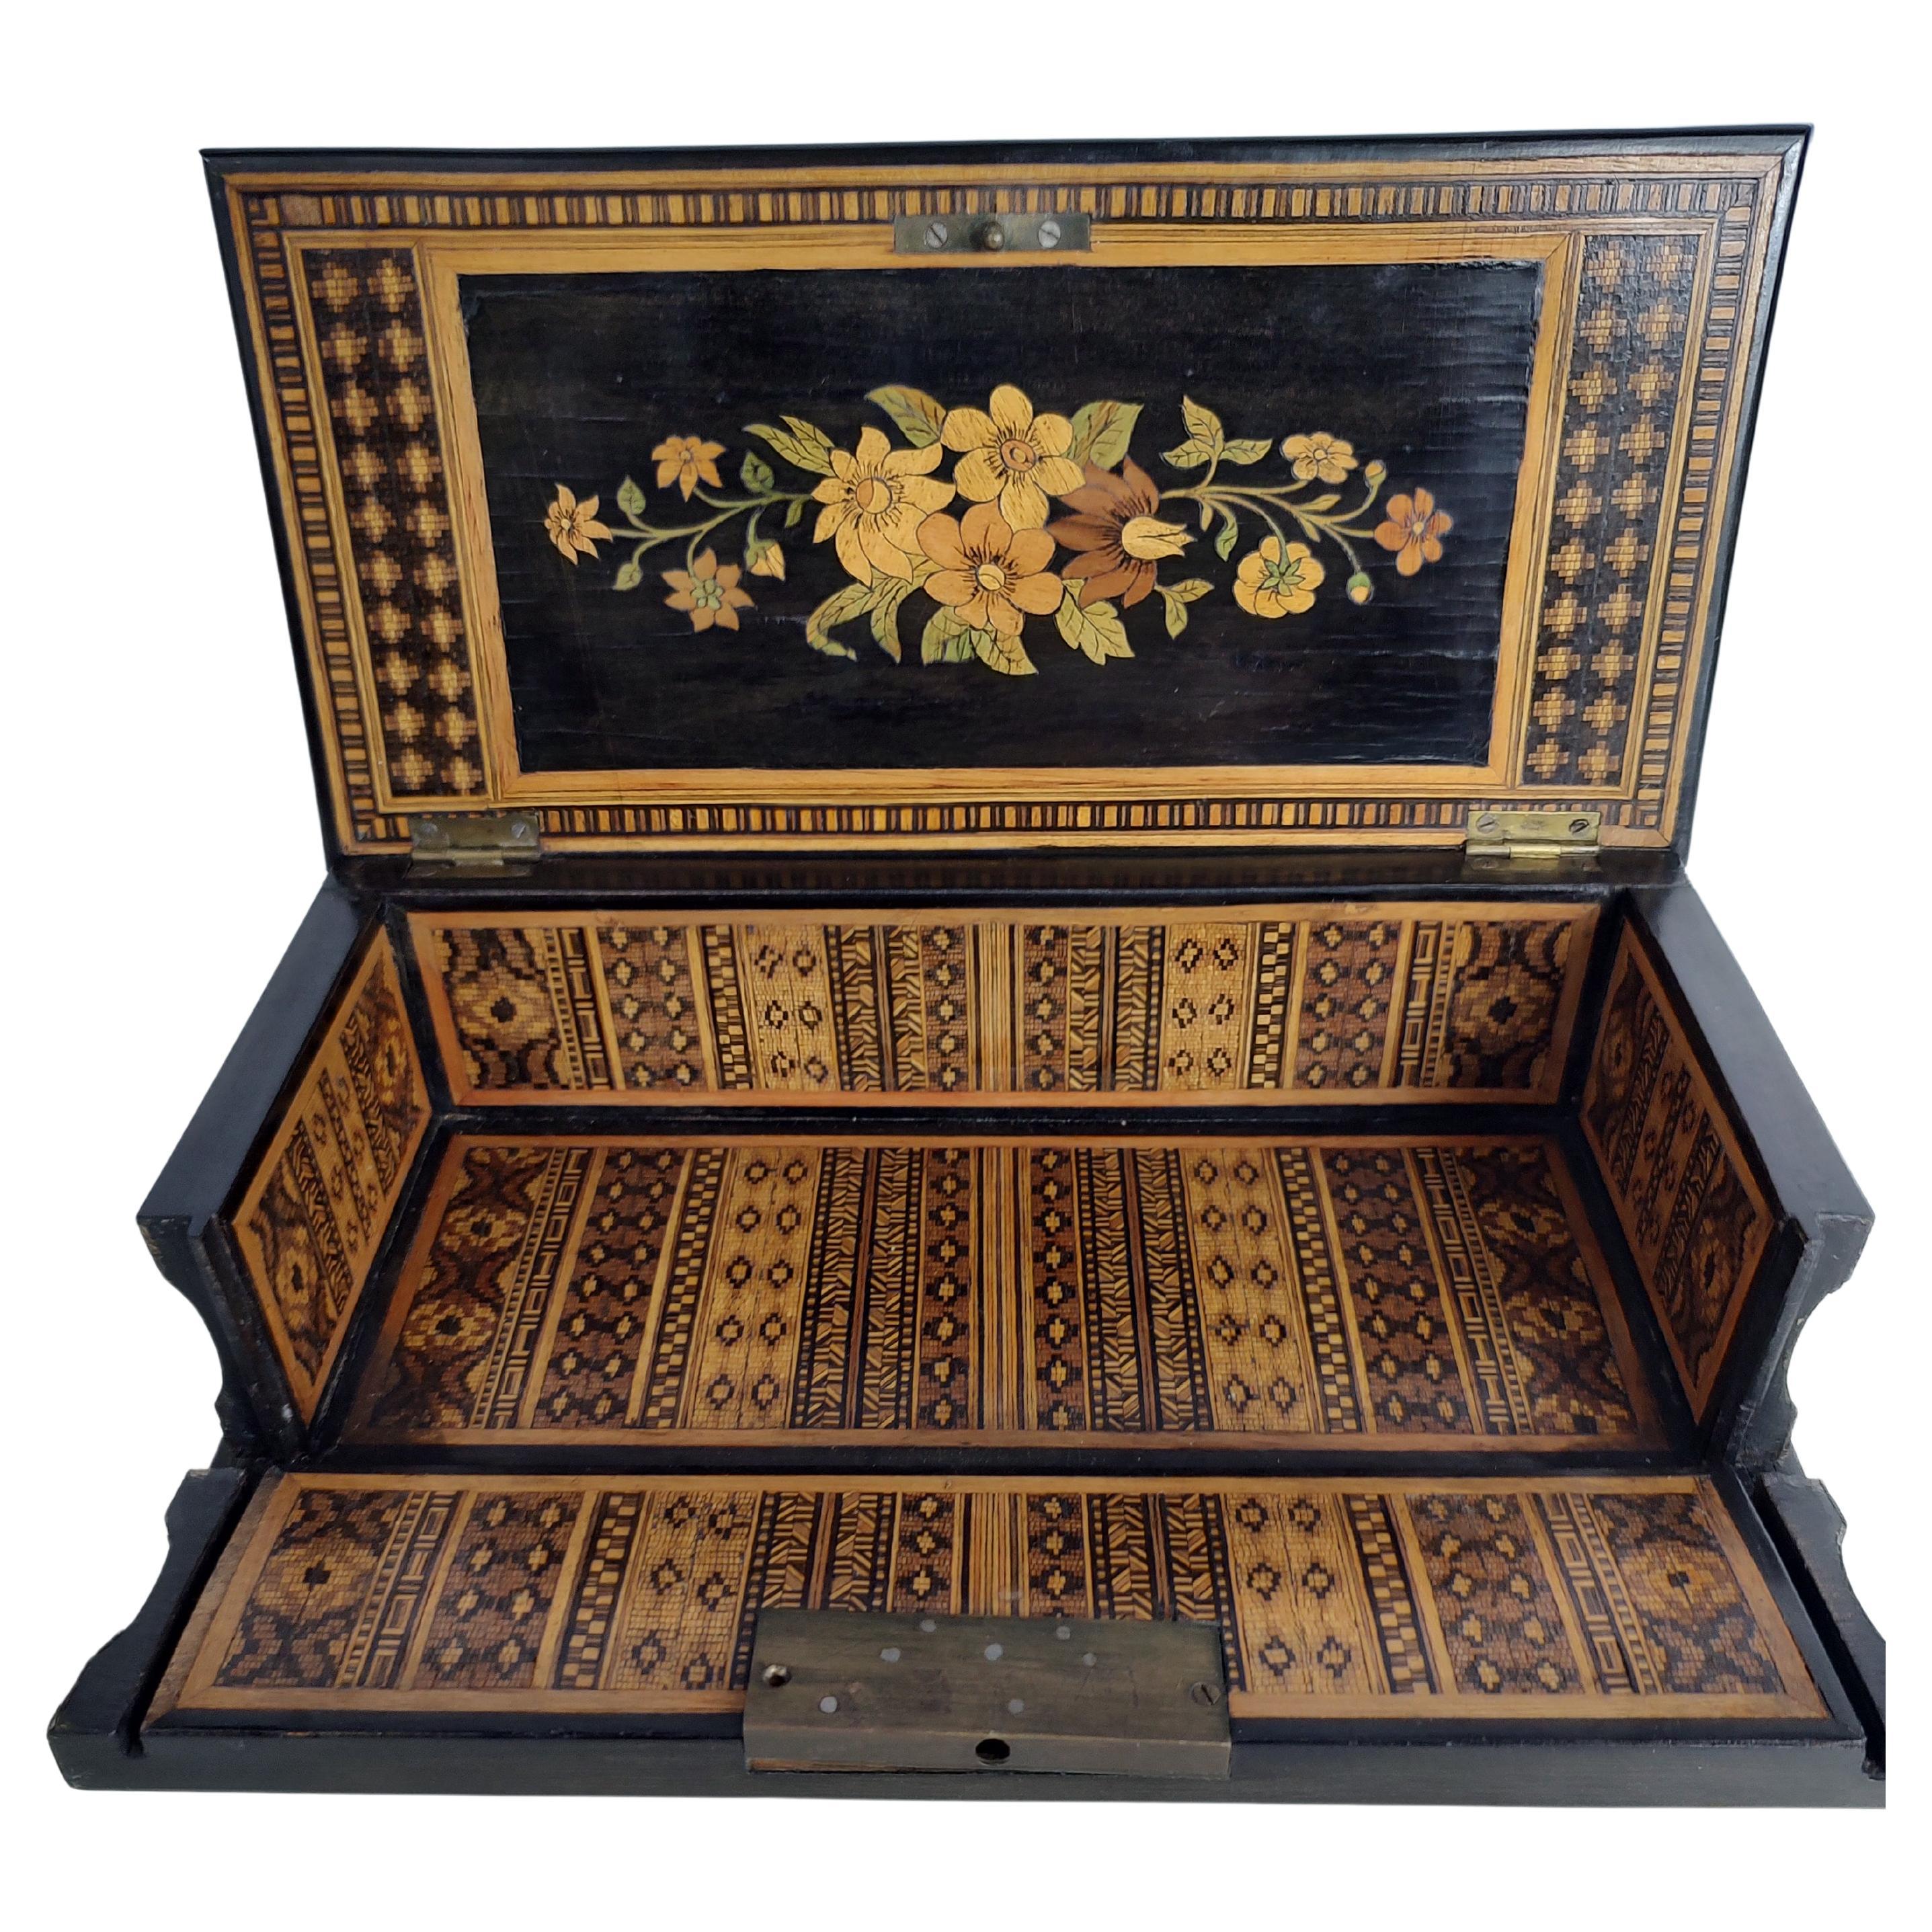 Amazing Marquetry and inlay on this Sorrento Napoli Box C1880. There is craftsmanship of the highest caliber all over this box. Box front drops down to reveal inside completely covered with tiny inlay. Top exterior has a pasta making scene with